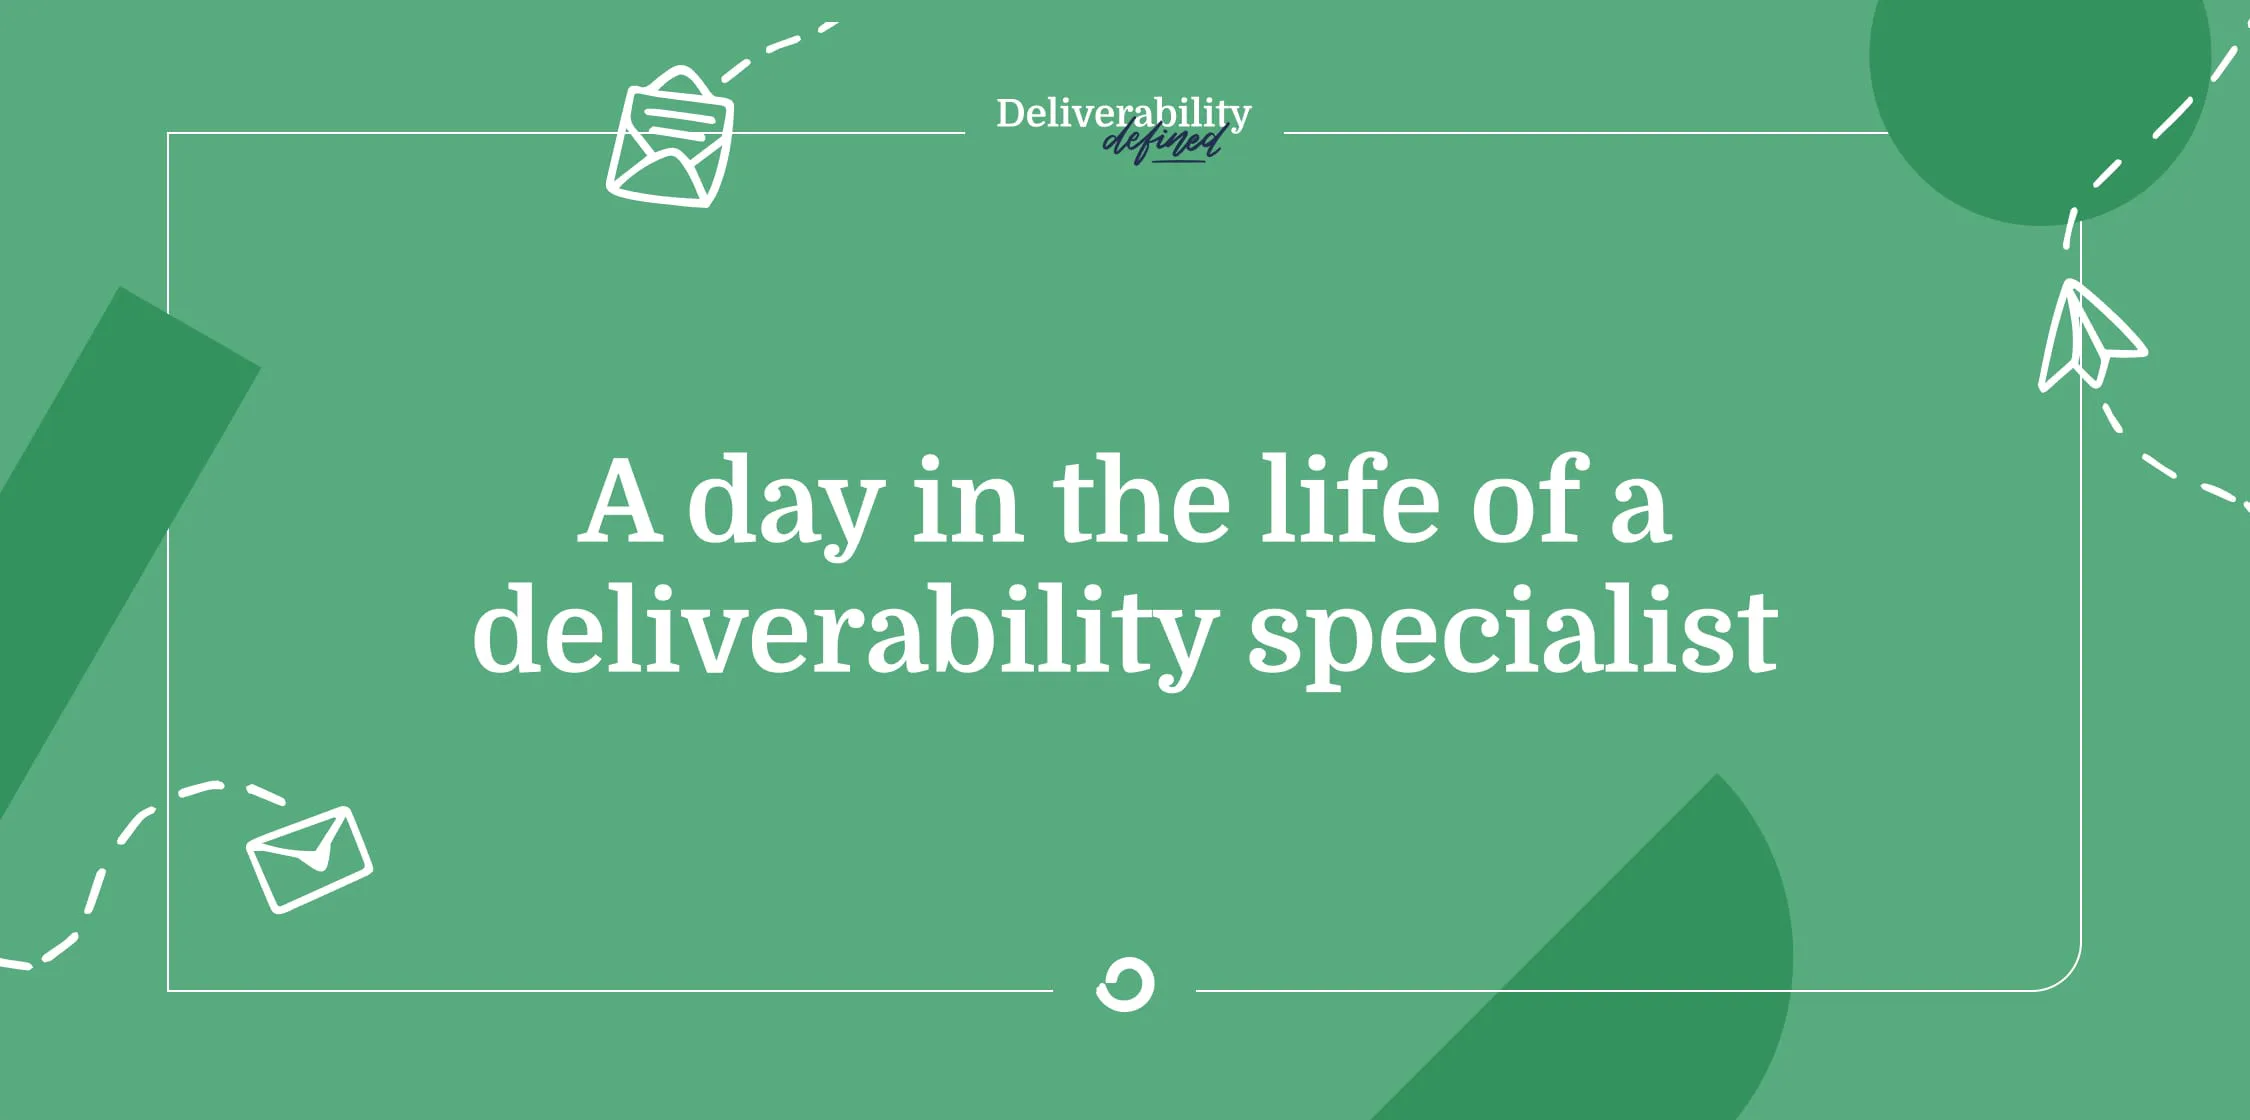 A day in the life of a deliverability expert